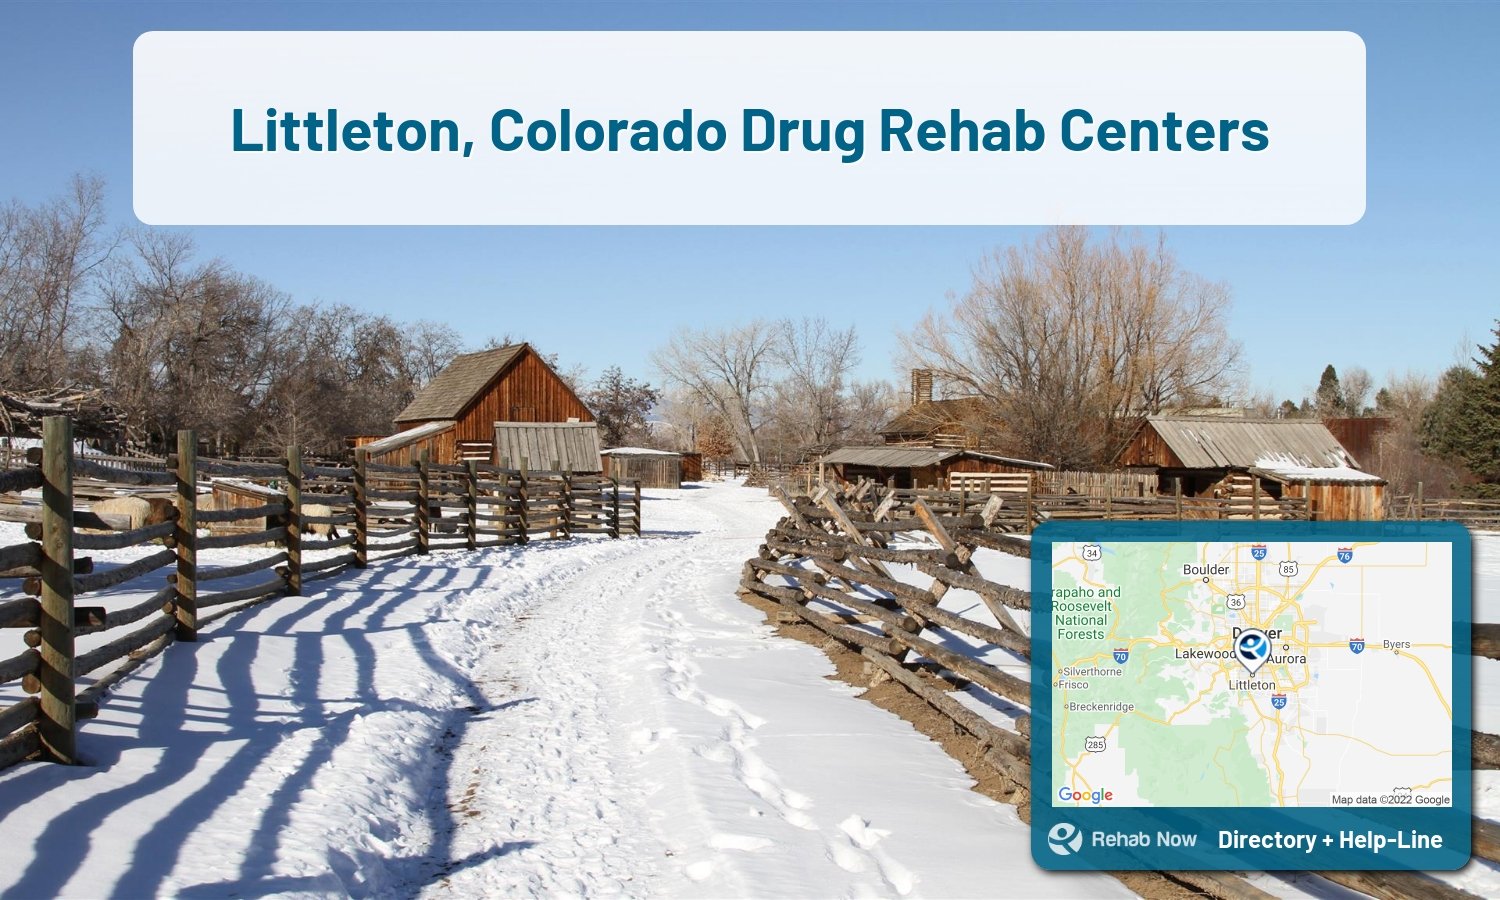 Littleton, CO Treatment Centers. Find drug rehab in Littleton, Colorado, or detox and treatment programs. Get the right help now!